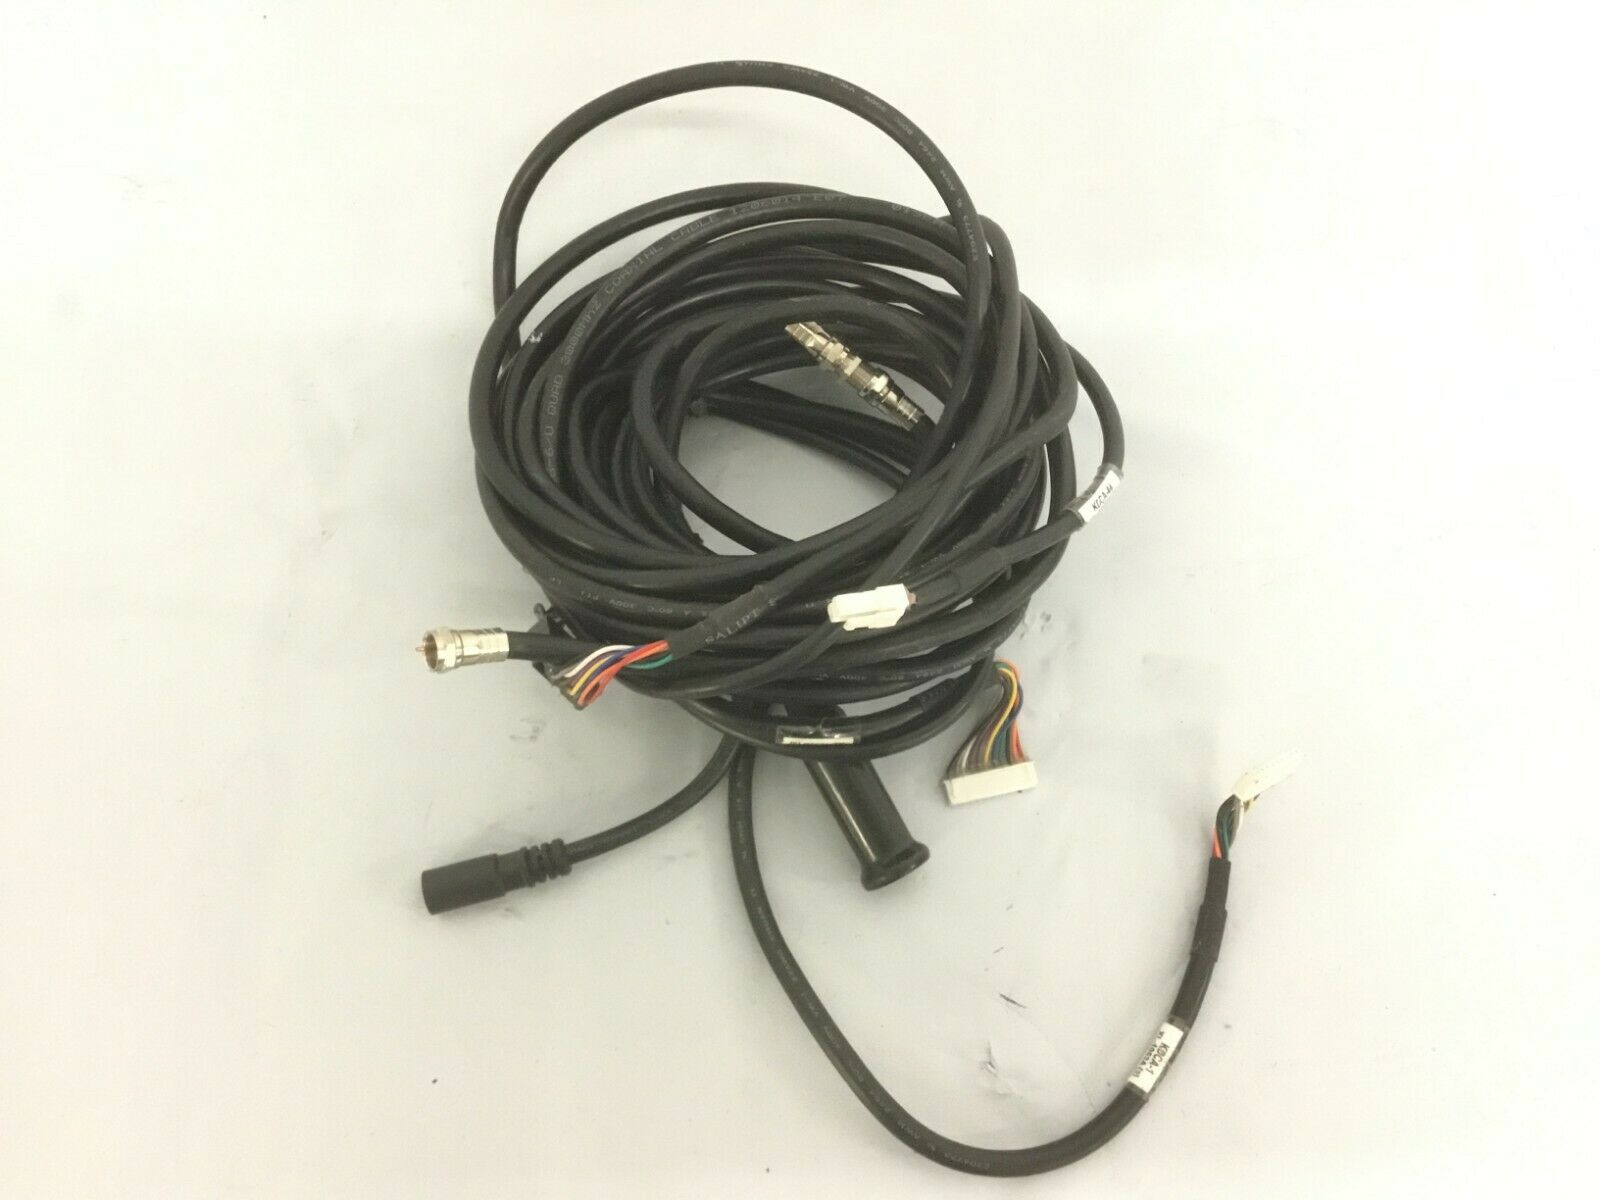 True Fitness TCS550-2 Treadmill Wire Harness Ensemble Including Video Cable (Used)